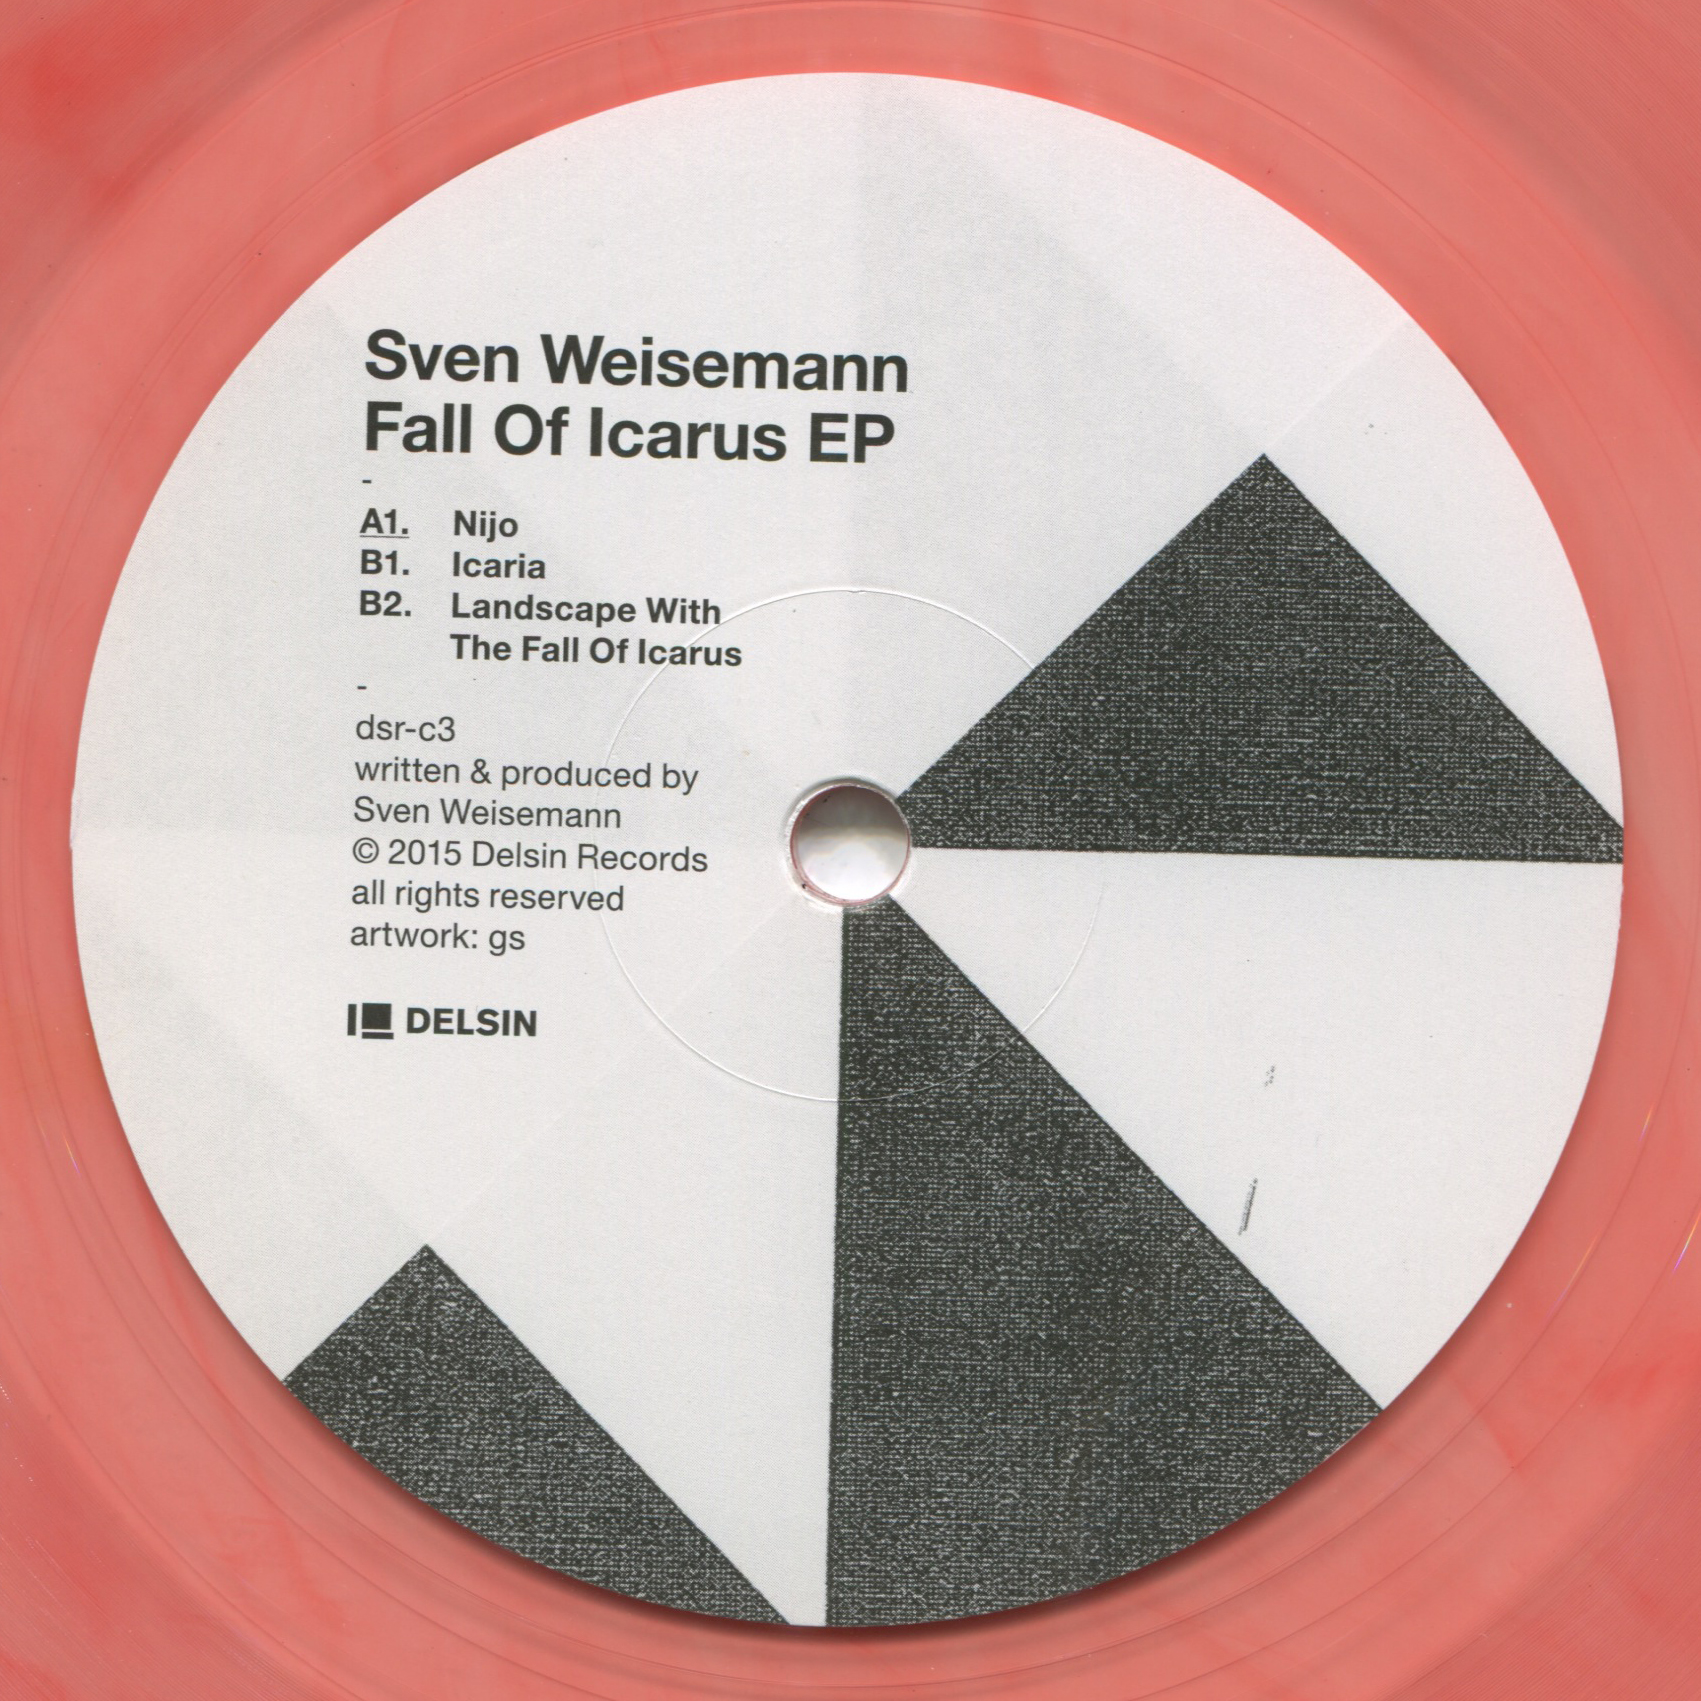 Sven Weisemann – Fall Of Icarus EP